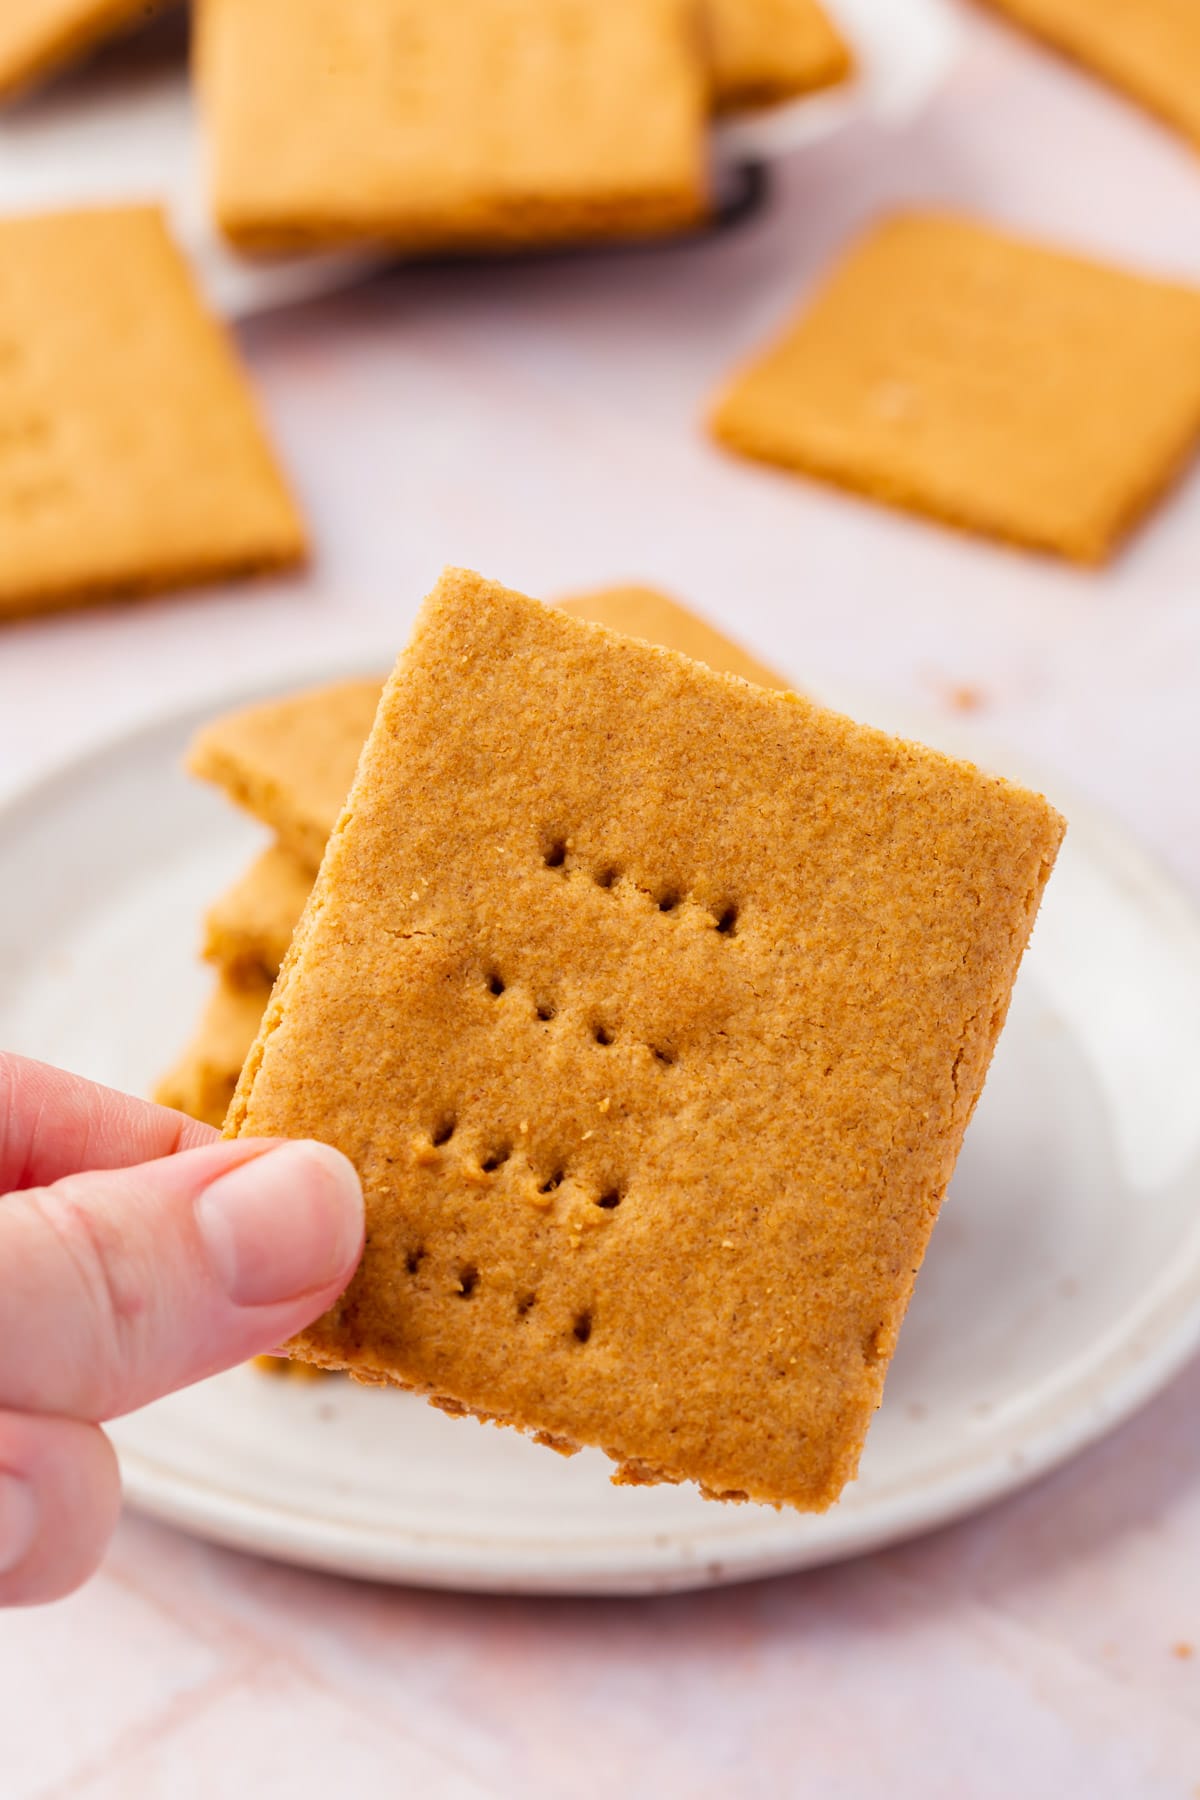 A hand holding a gluten-free graham cracker square.